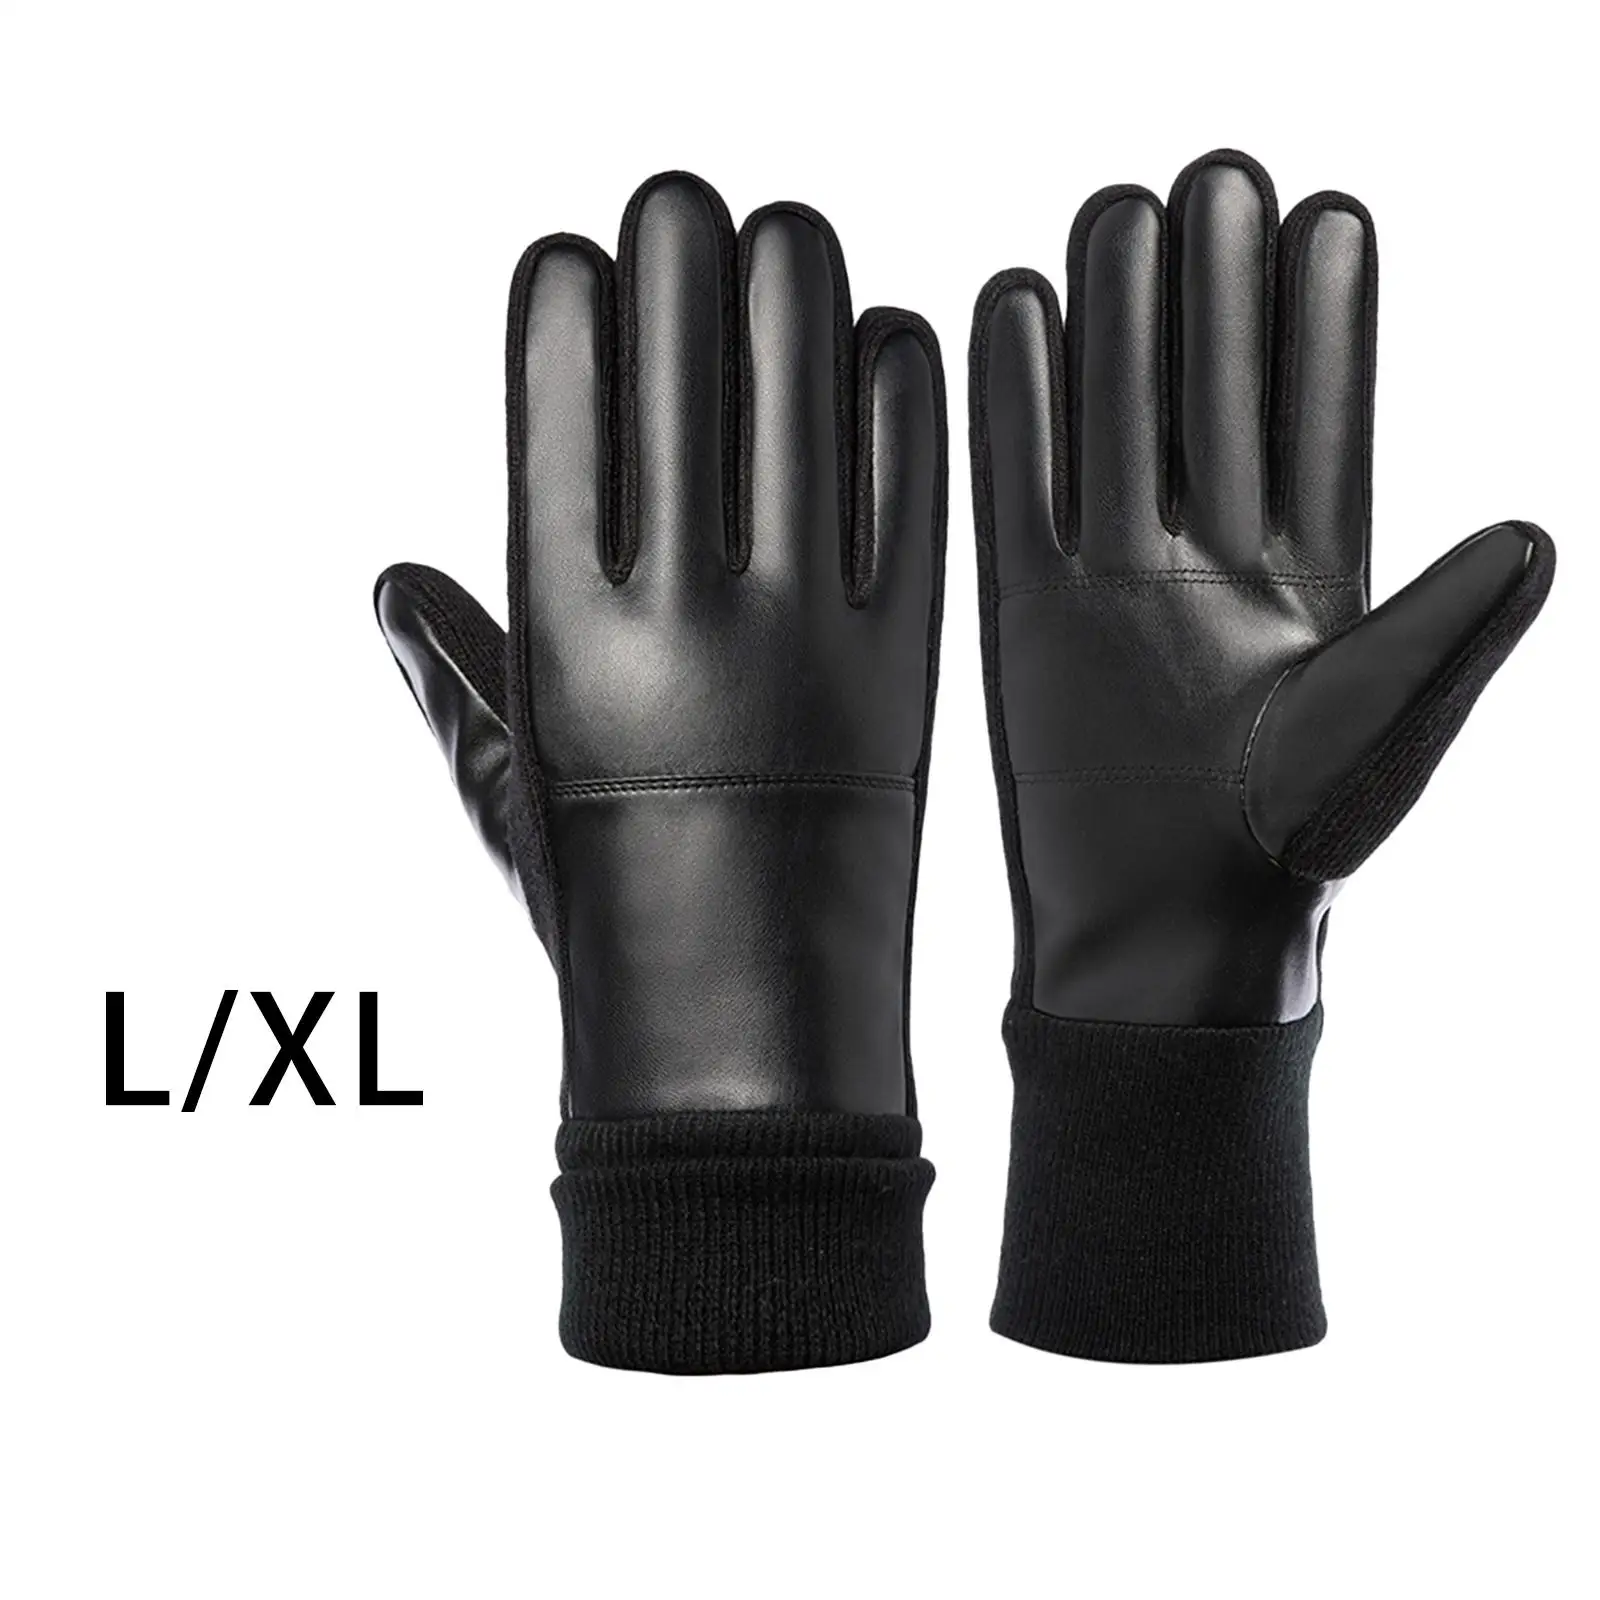 Thermal Men Gloves AntiSlip Warm Full Finger Waterproof Windproof for Bicycle Skiing Motorcycle Sport Cycling